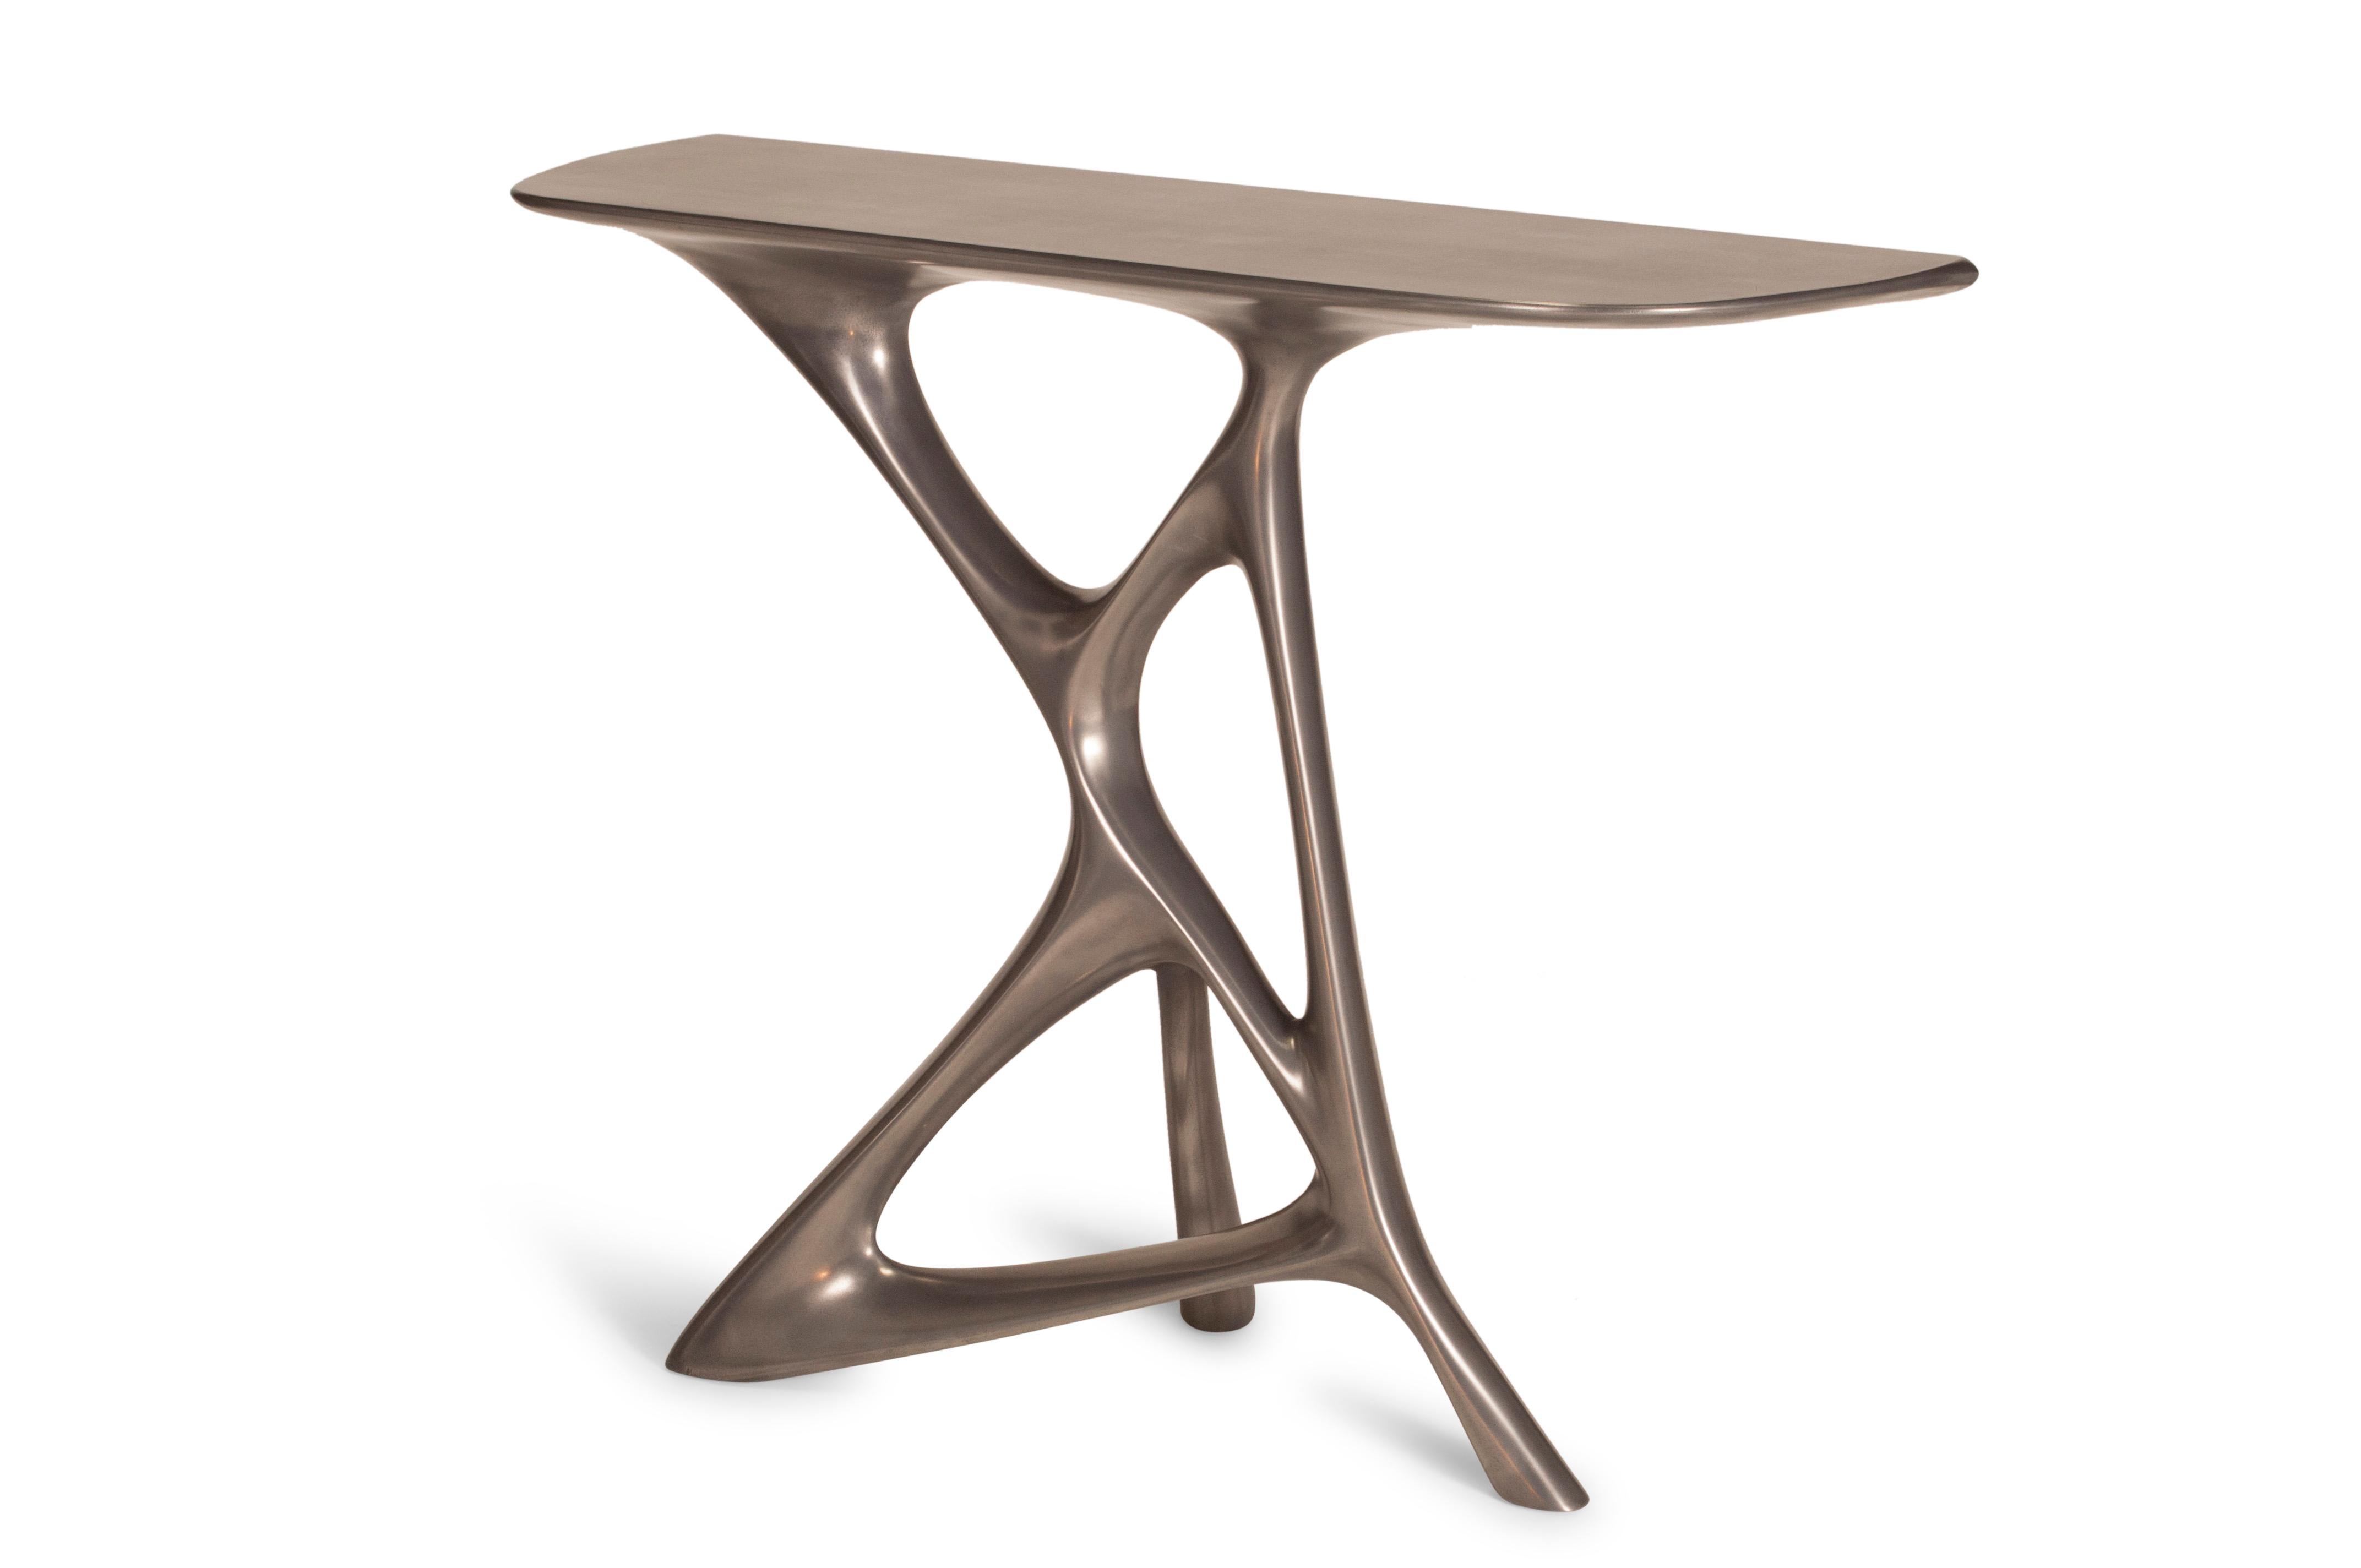 Modern Amorph Anika Console in Stainless Steel Finish